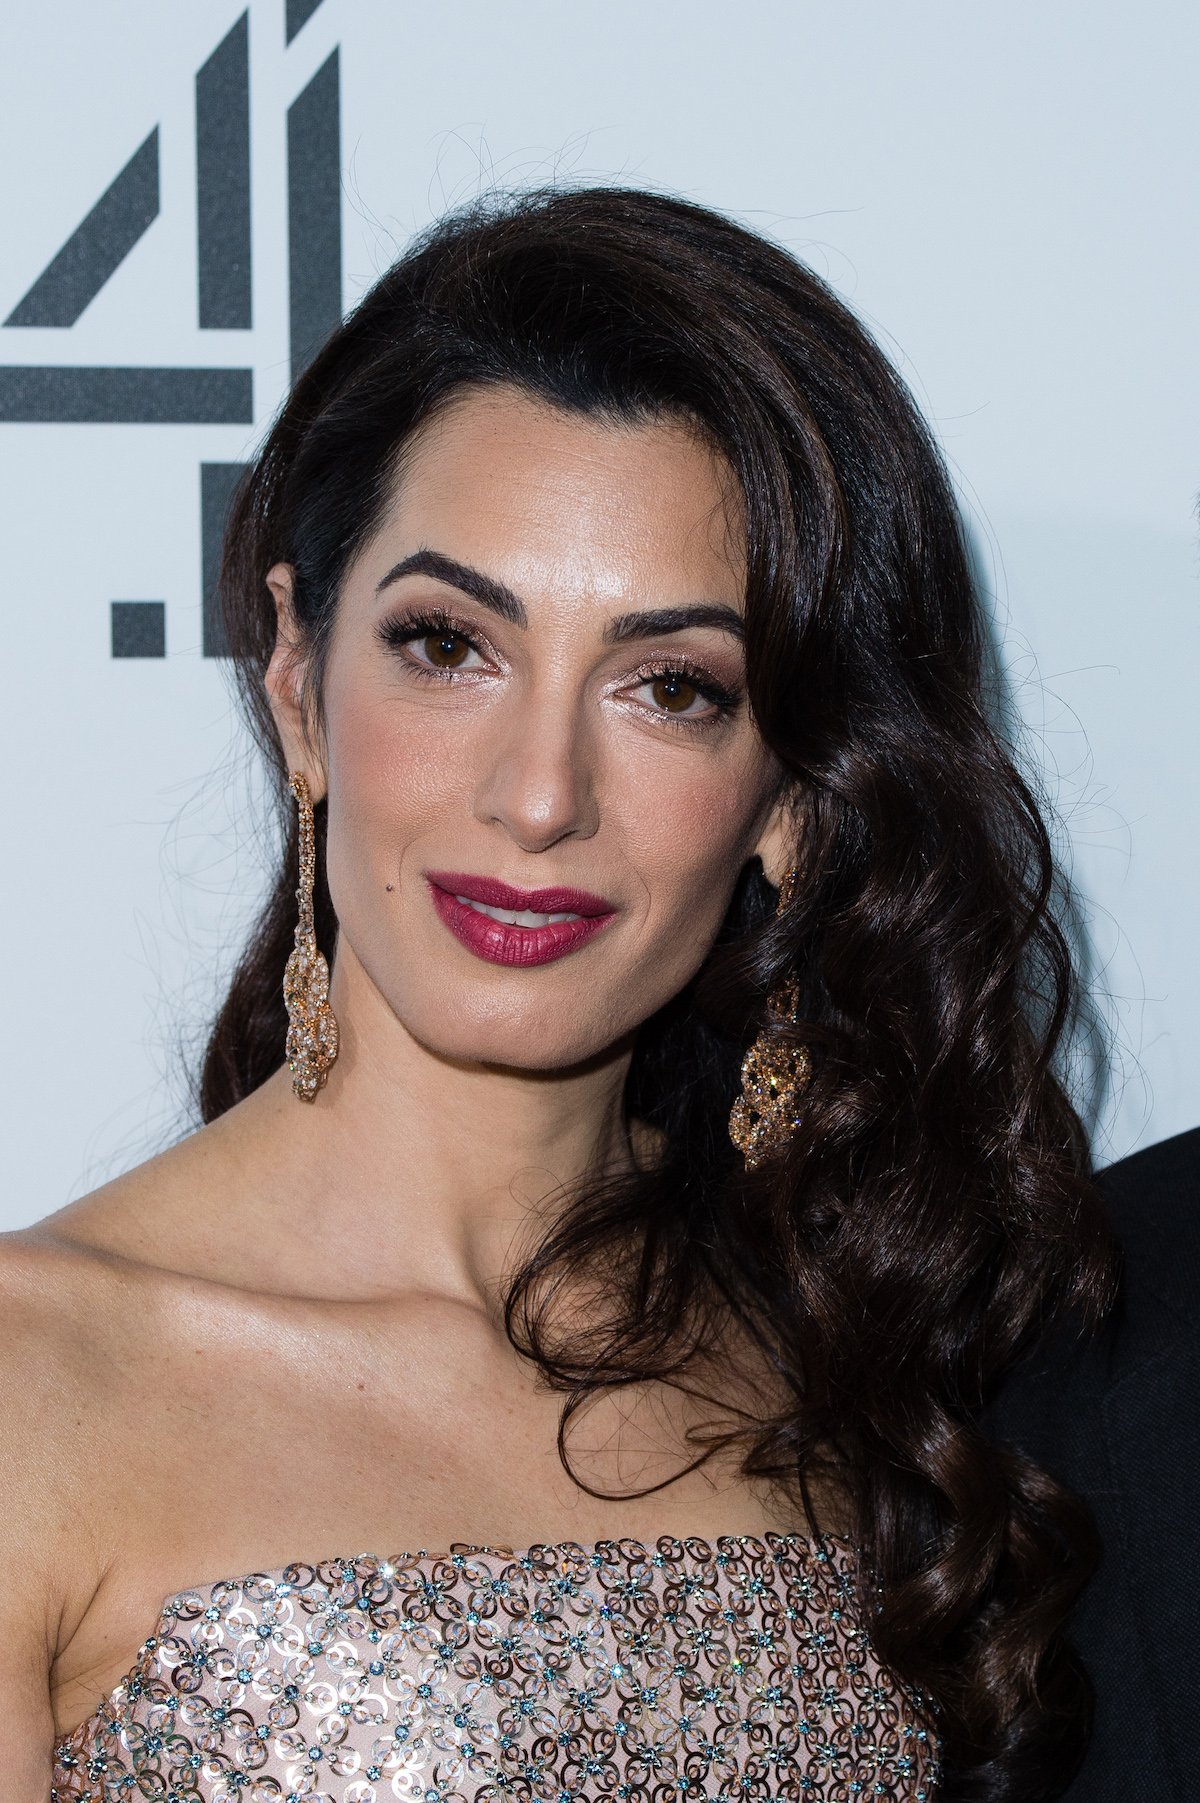 Close-up of Amal Clooney's face smiling for the camera.